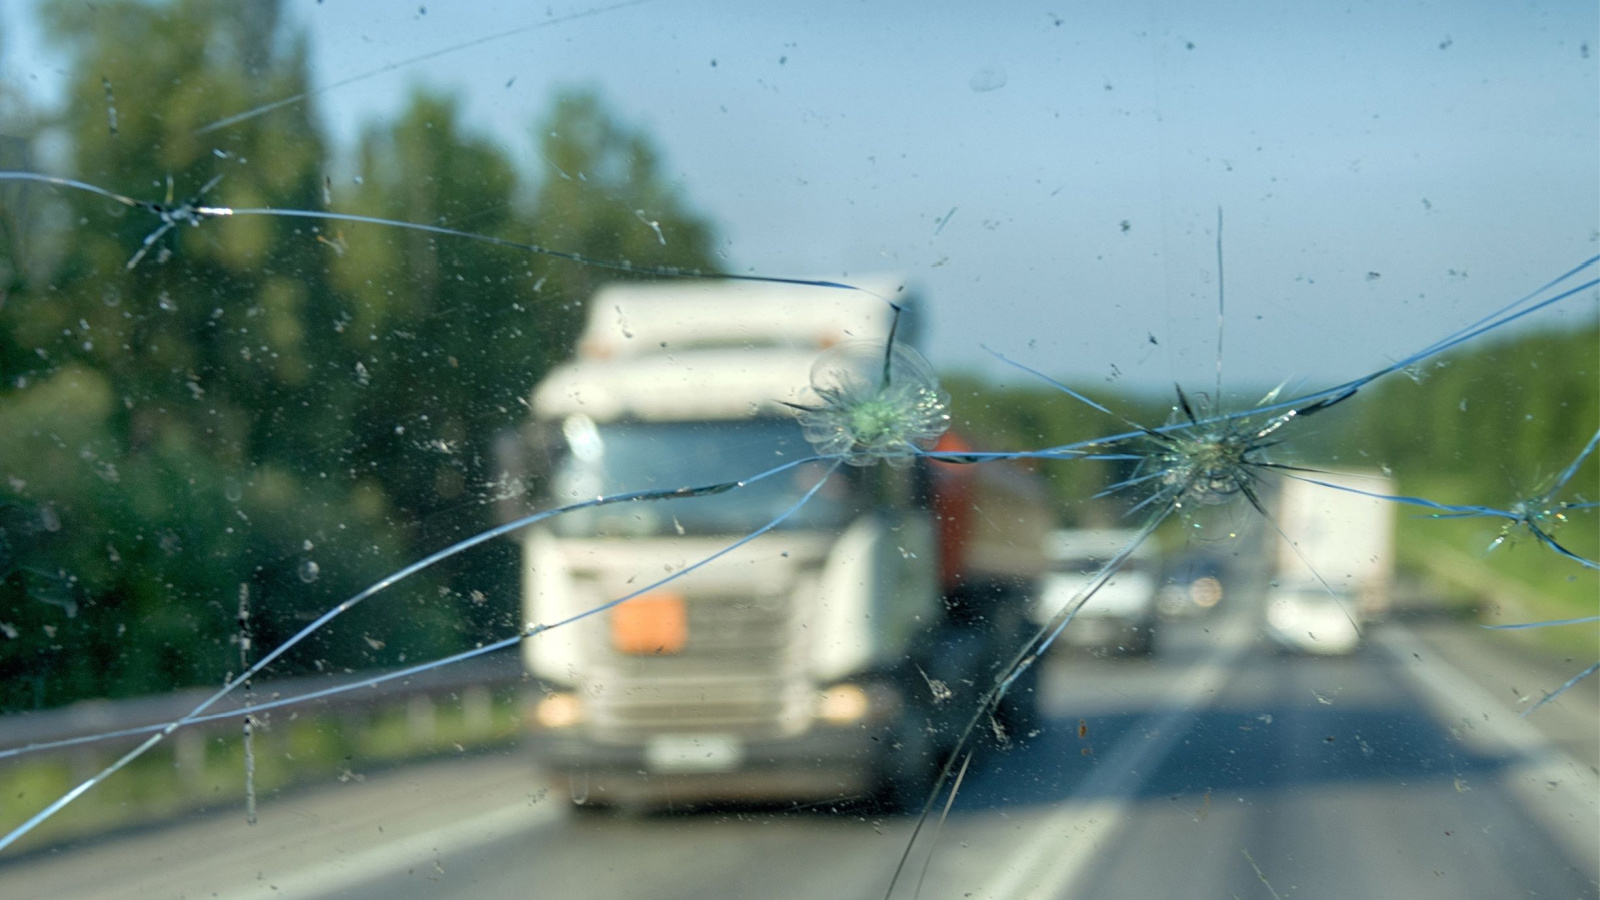 What to Do After a Truck Accident | St. Louis Truck Accident Law Firm | Auto Crash Lawyers Near St. Louis